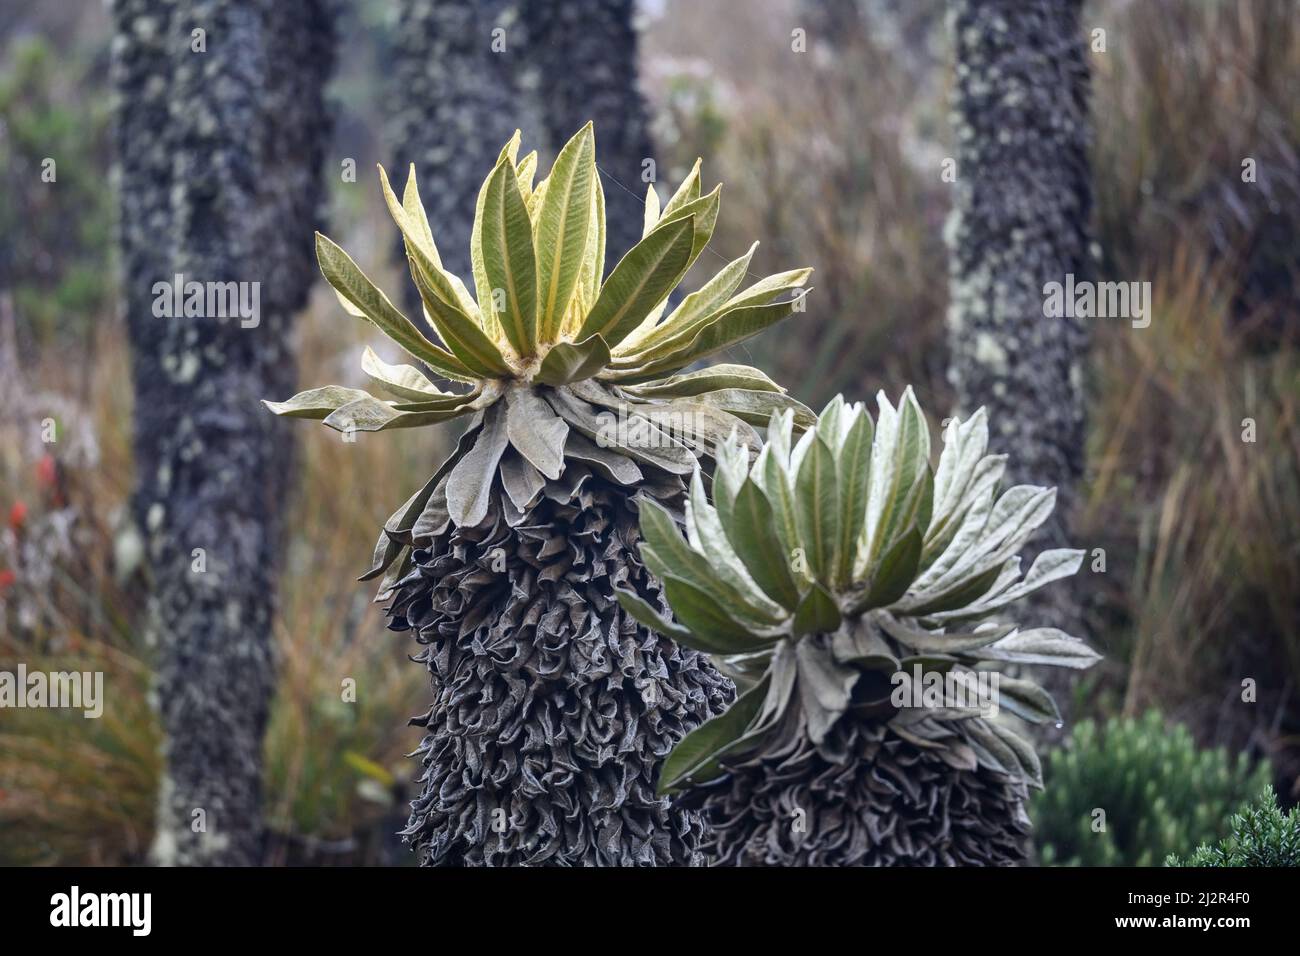 Espeletia plants in the Andes mountains. Colombia, South America. Stock Photo